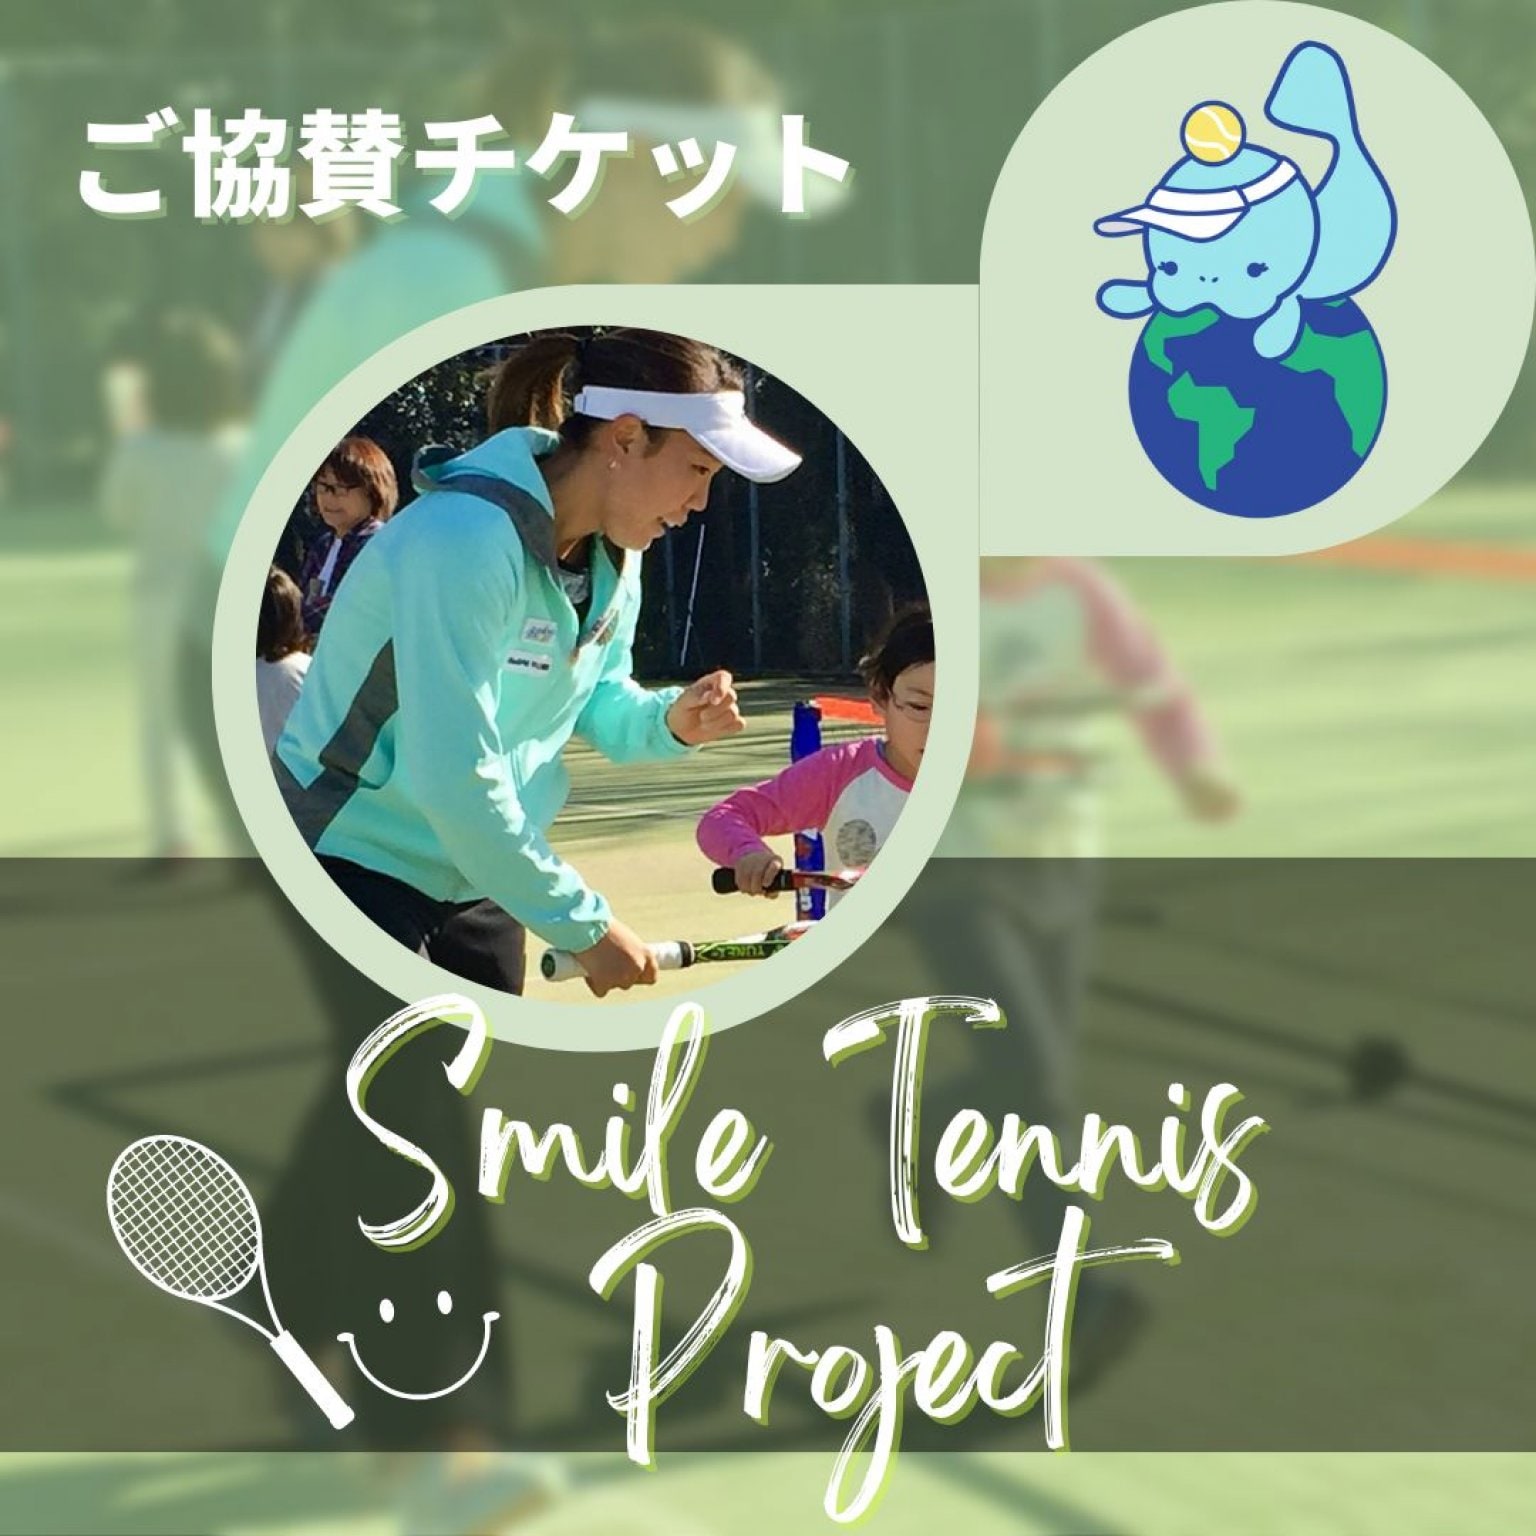 【Smile Tennis Project】ご協賛チケット